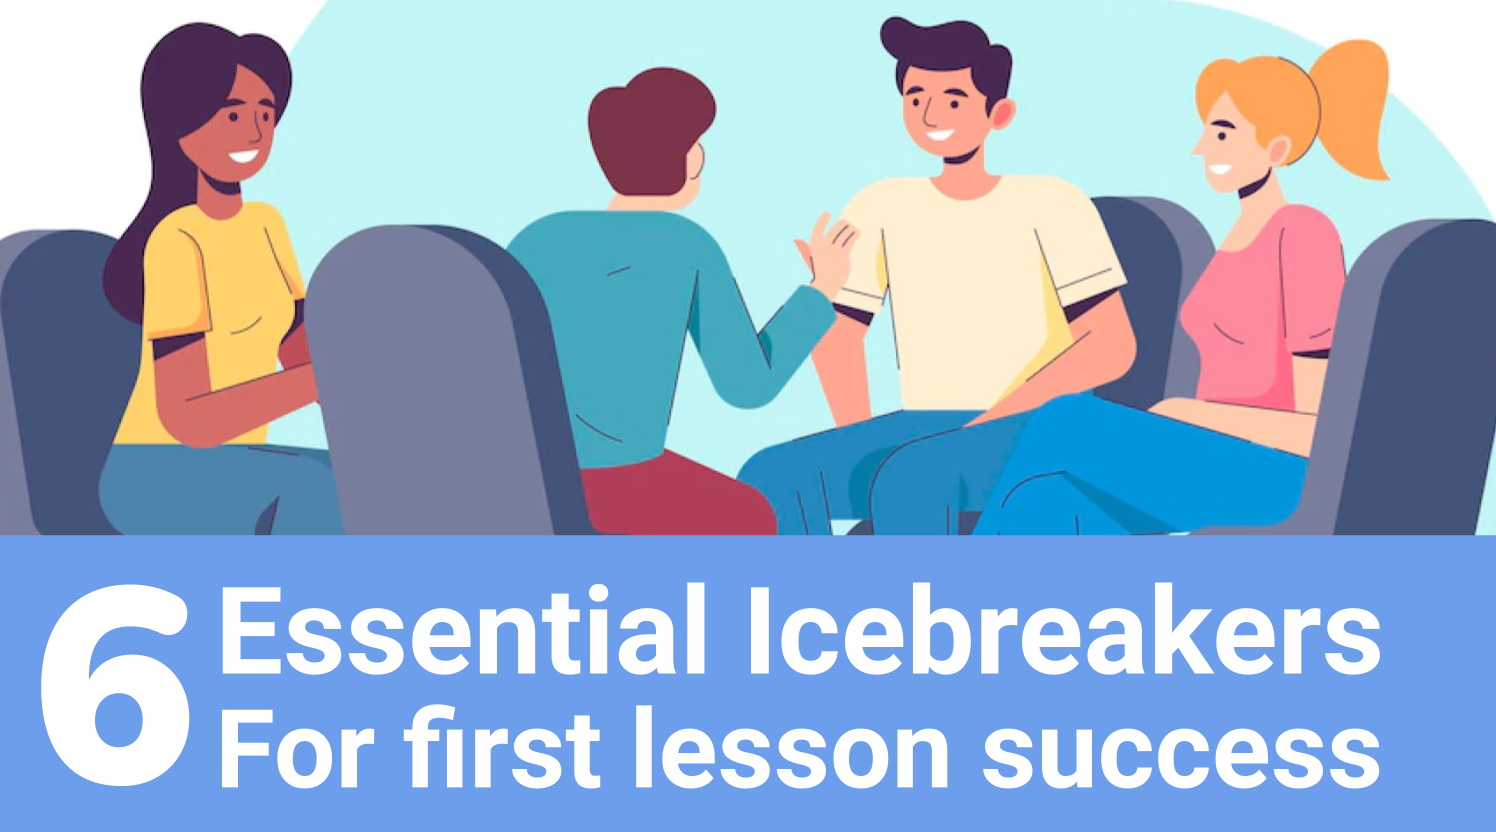 Your First Lesson: 5 Essential Ice-Breakers That Guarantee Success